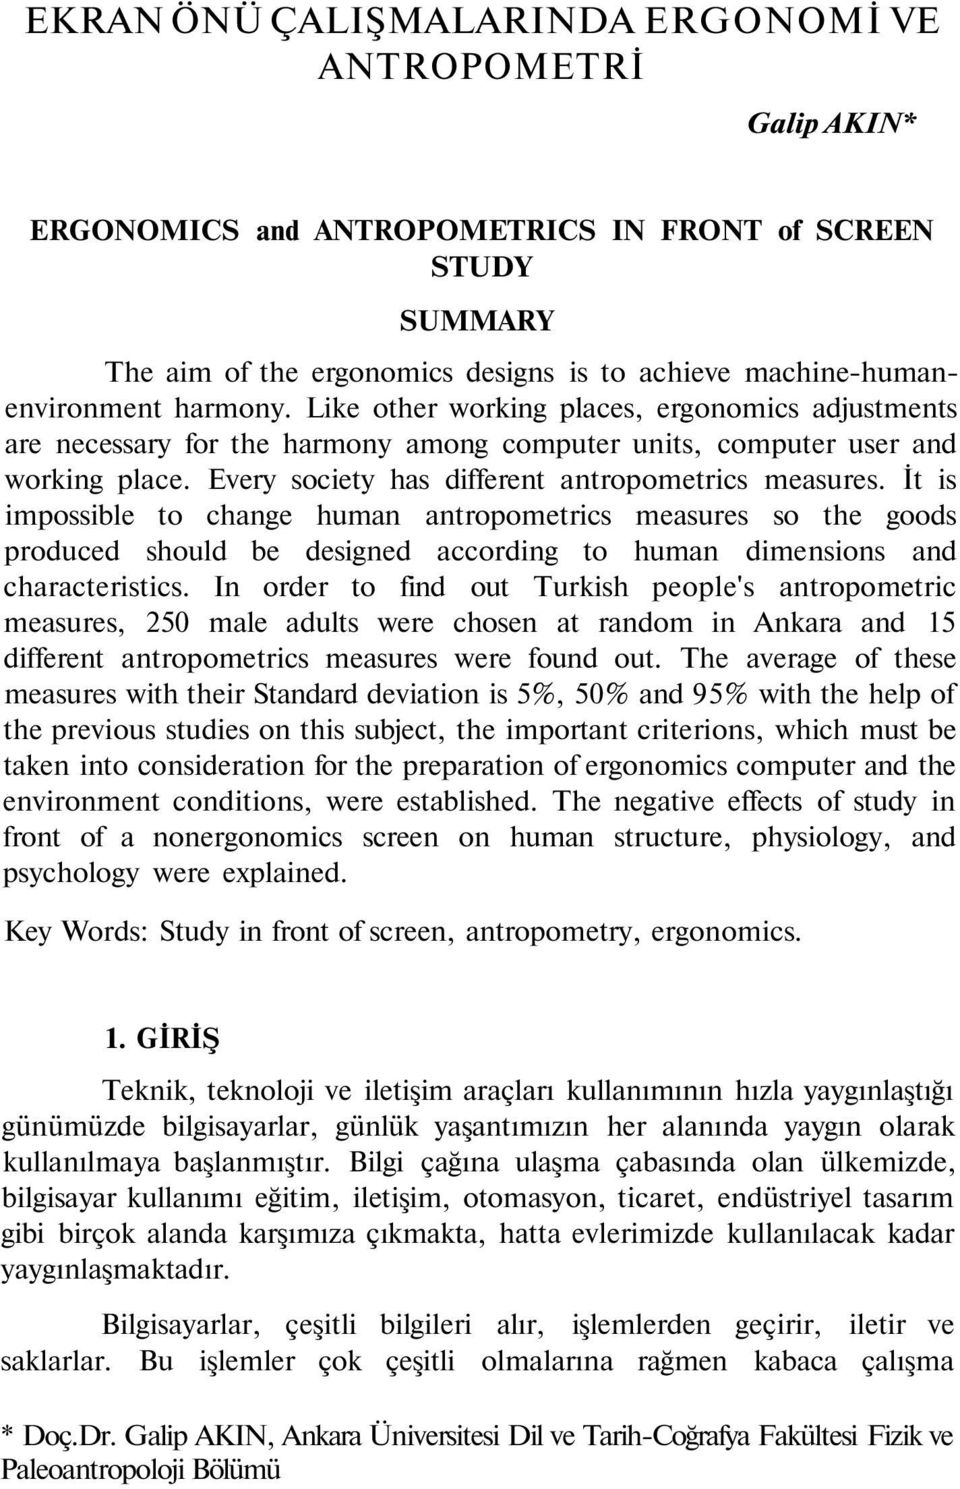 İt is impossible to change human antropometrics measures so the goods produced should be designed according to human dimensions and characteristics.